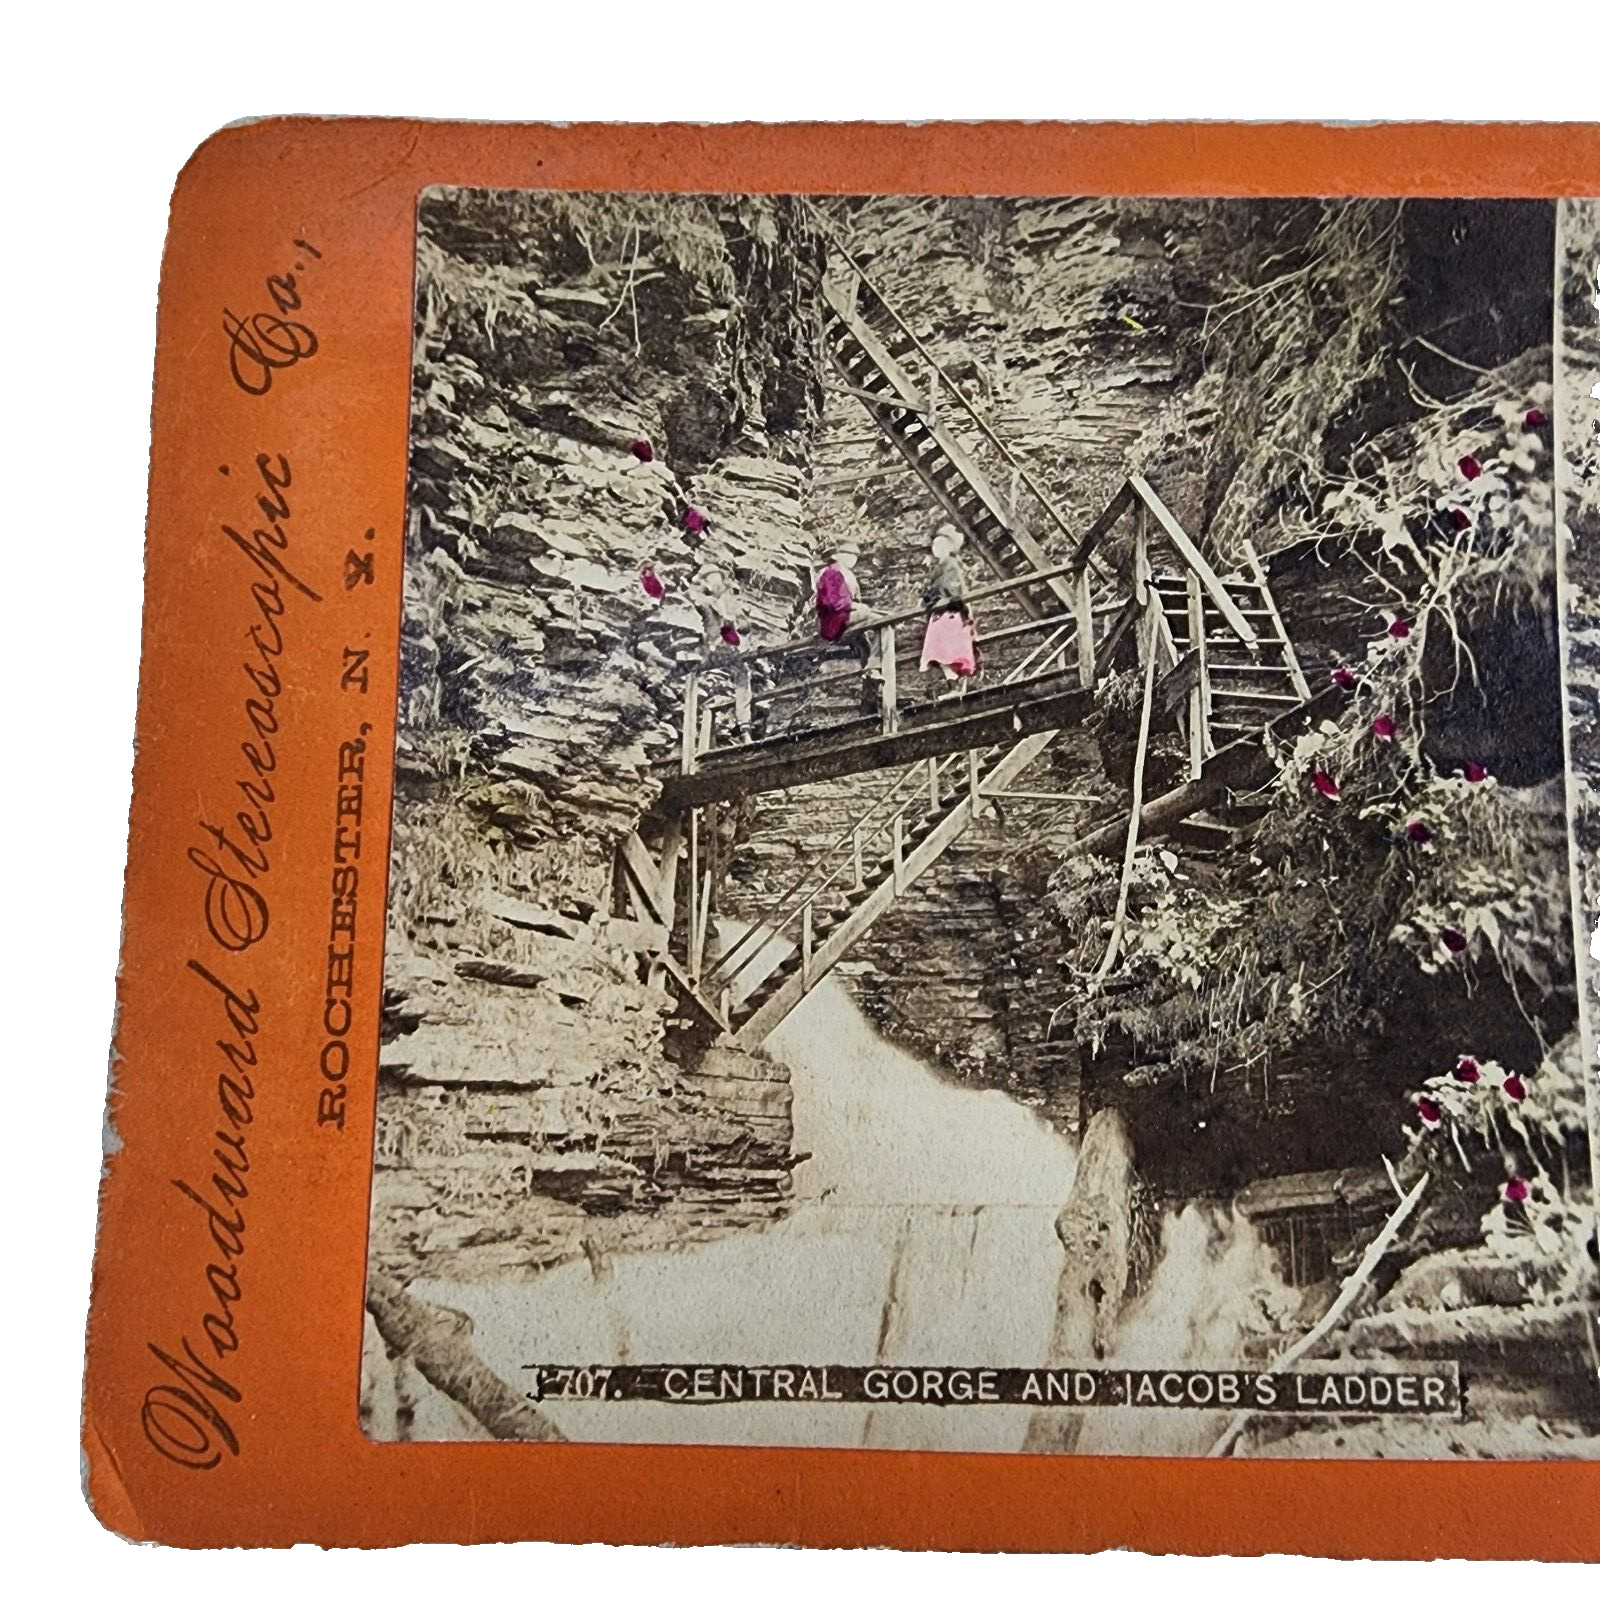 Antique Stereoview Card, Havana Glen Ny, Jacobs Ladder, Woodward Stereoscopic Co